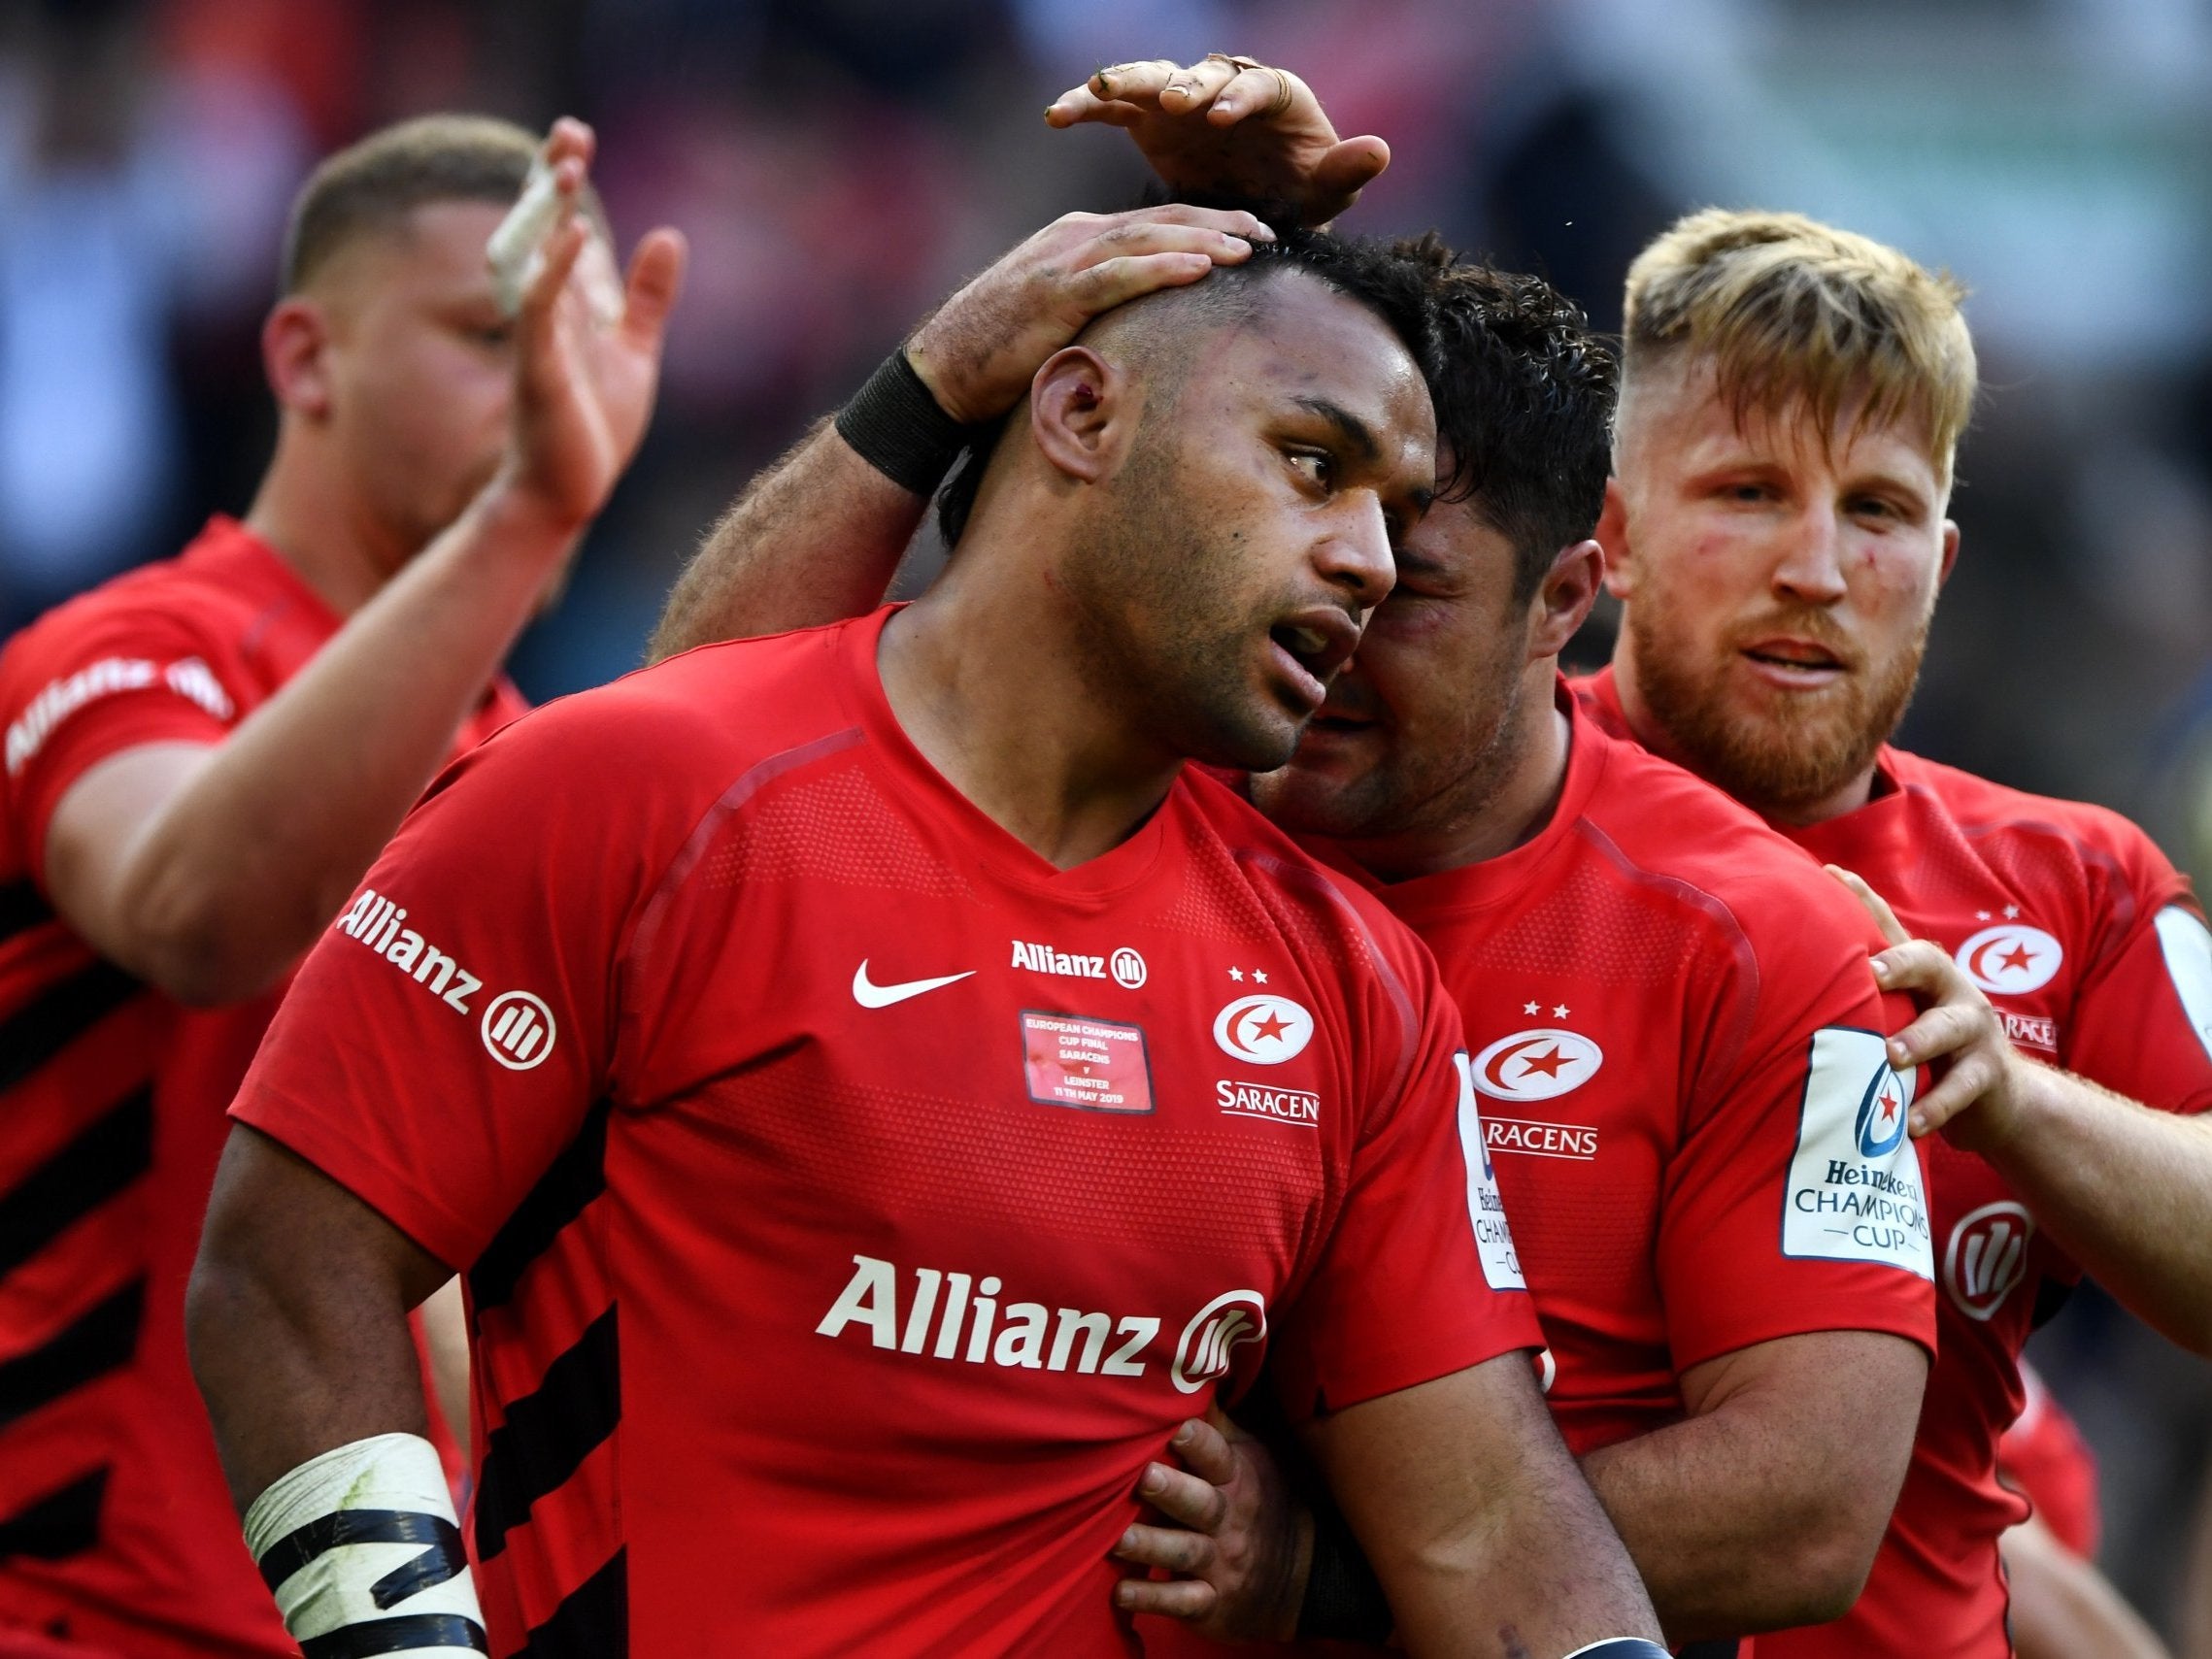 Saracens have rallied around Vunipola in recent weeks